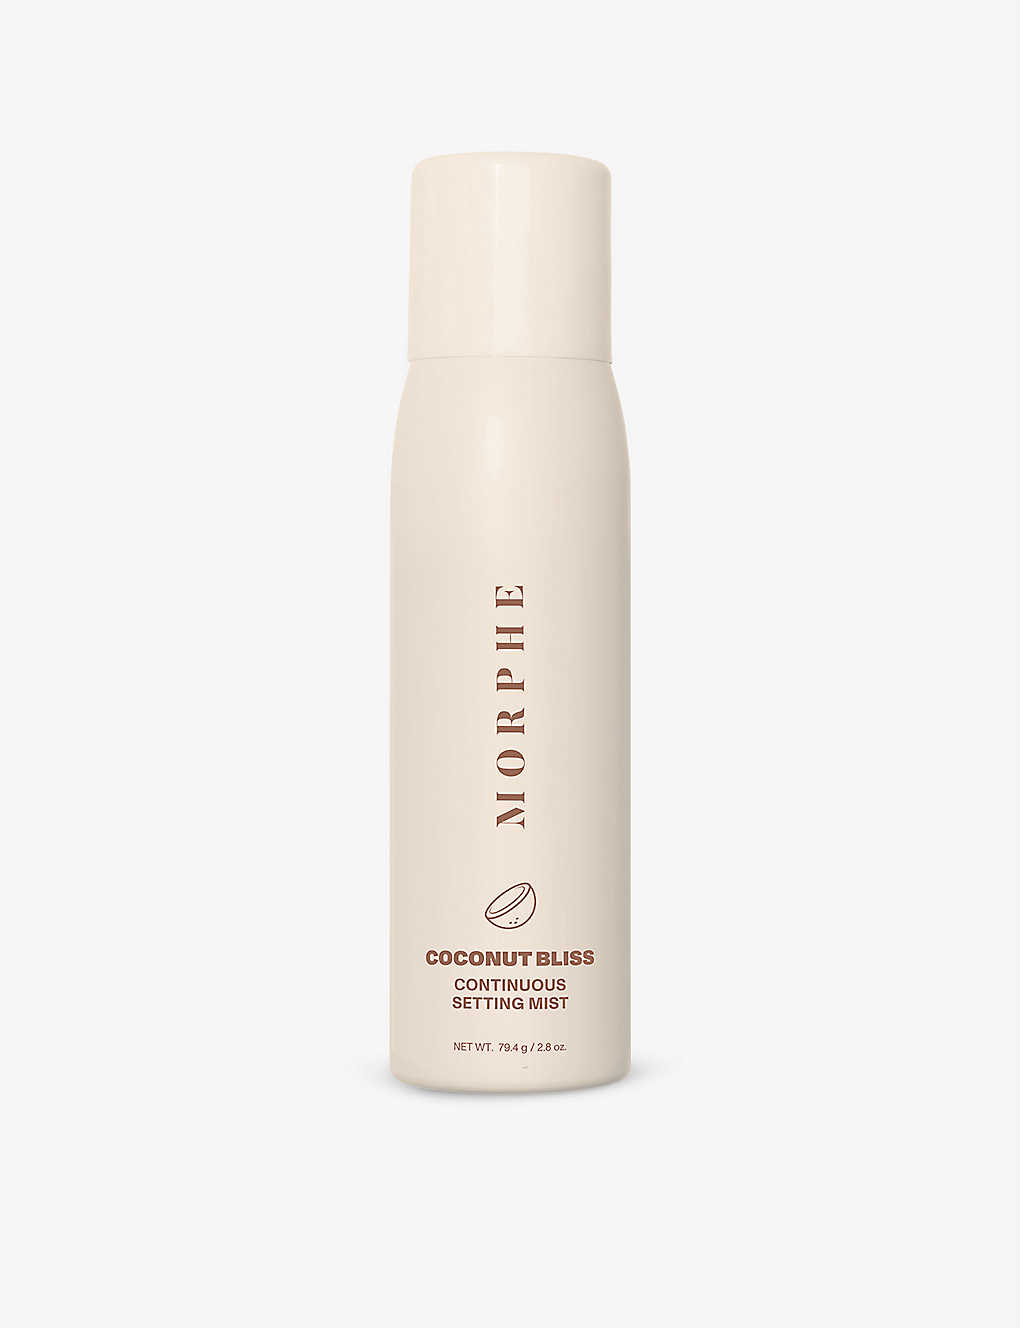 Morphe Coconut Bliss Continuous Setting Mist 79.4g In Na